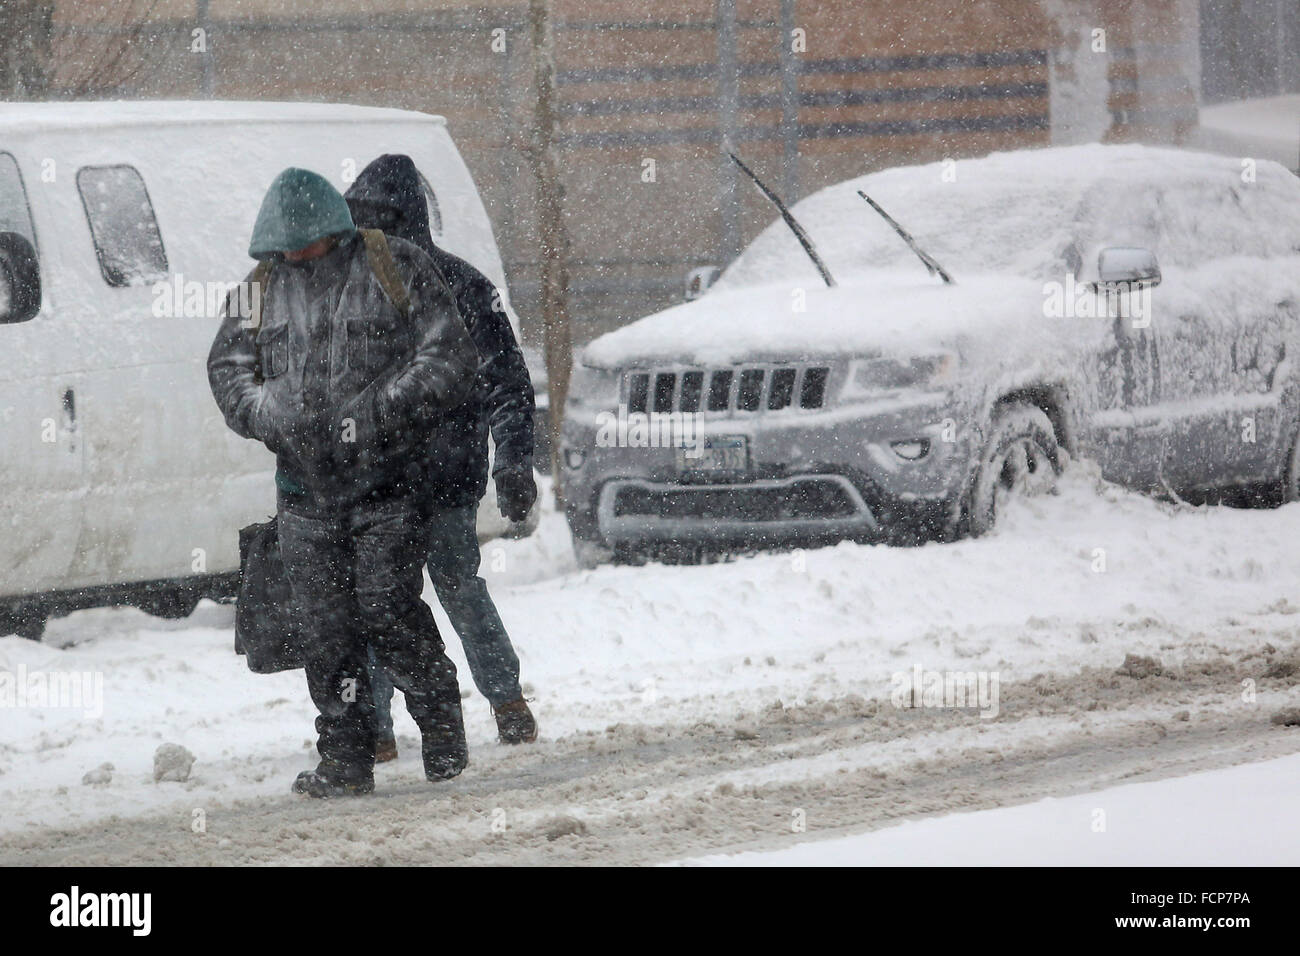 Staten Island, NY, USA. 23rd Jan, 2016. People walk away from the Staten Island Ferry St. George terminal during Winter Storm Jonas. A travel ban had been in place for hours, but the ferry still operated. Snowfall projections for Staten Island were approximately 12-18in, with winds gusting up to 50 miles an hour. Late afternoon, buses ceased to run and a travel ban was enforced by the NYPD. This lack of transportation stranded many residents of Staten Island who had taken the ferry home. People were forced to try and walk to their destination in the blizzard. New York Governor Andrew Cuomo de Stock Photo